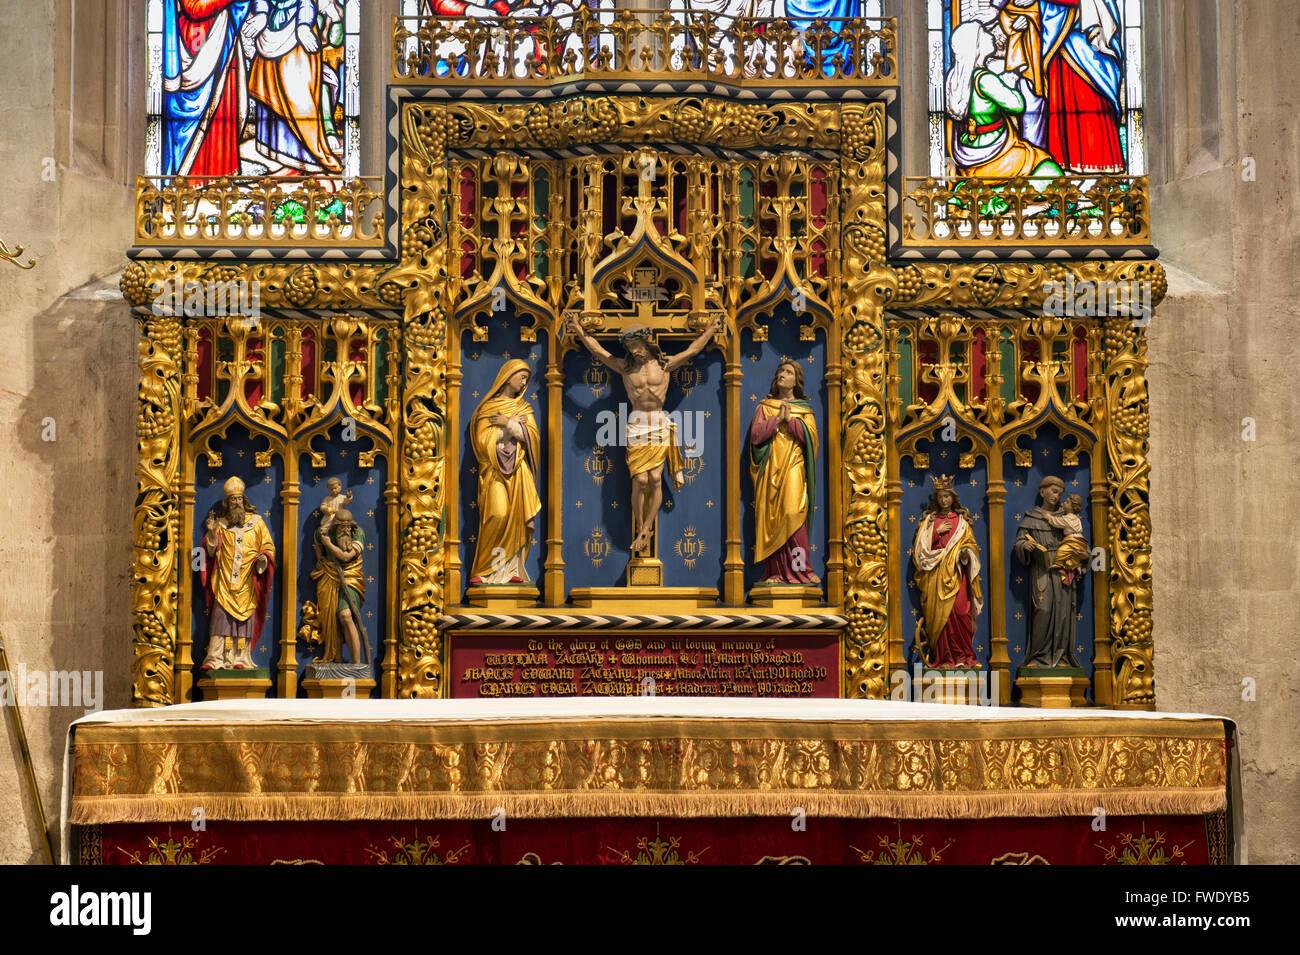 The reredos in St John the Baptist church, Cirencester, Gloucestershire, England Stock Photo